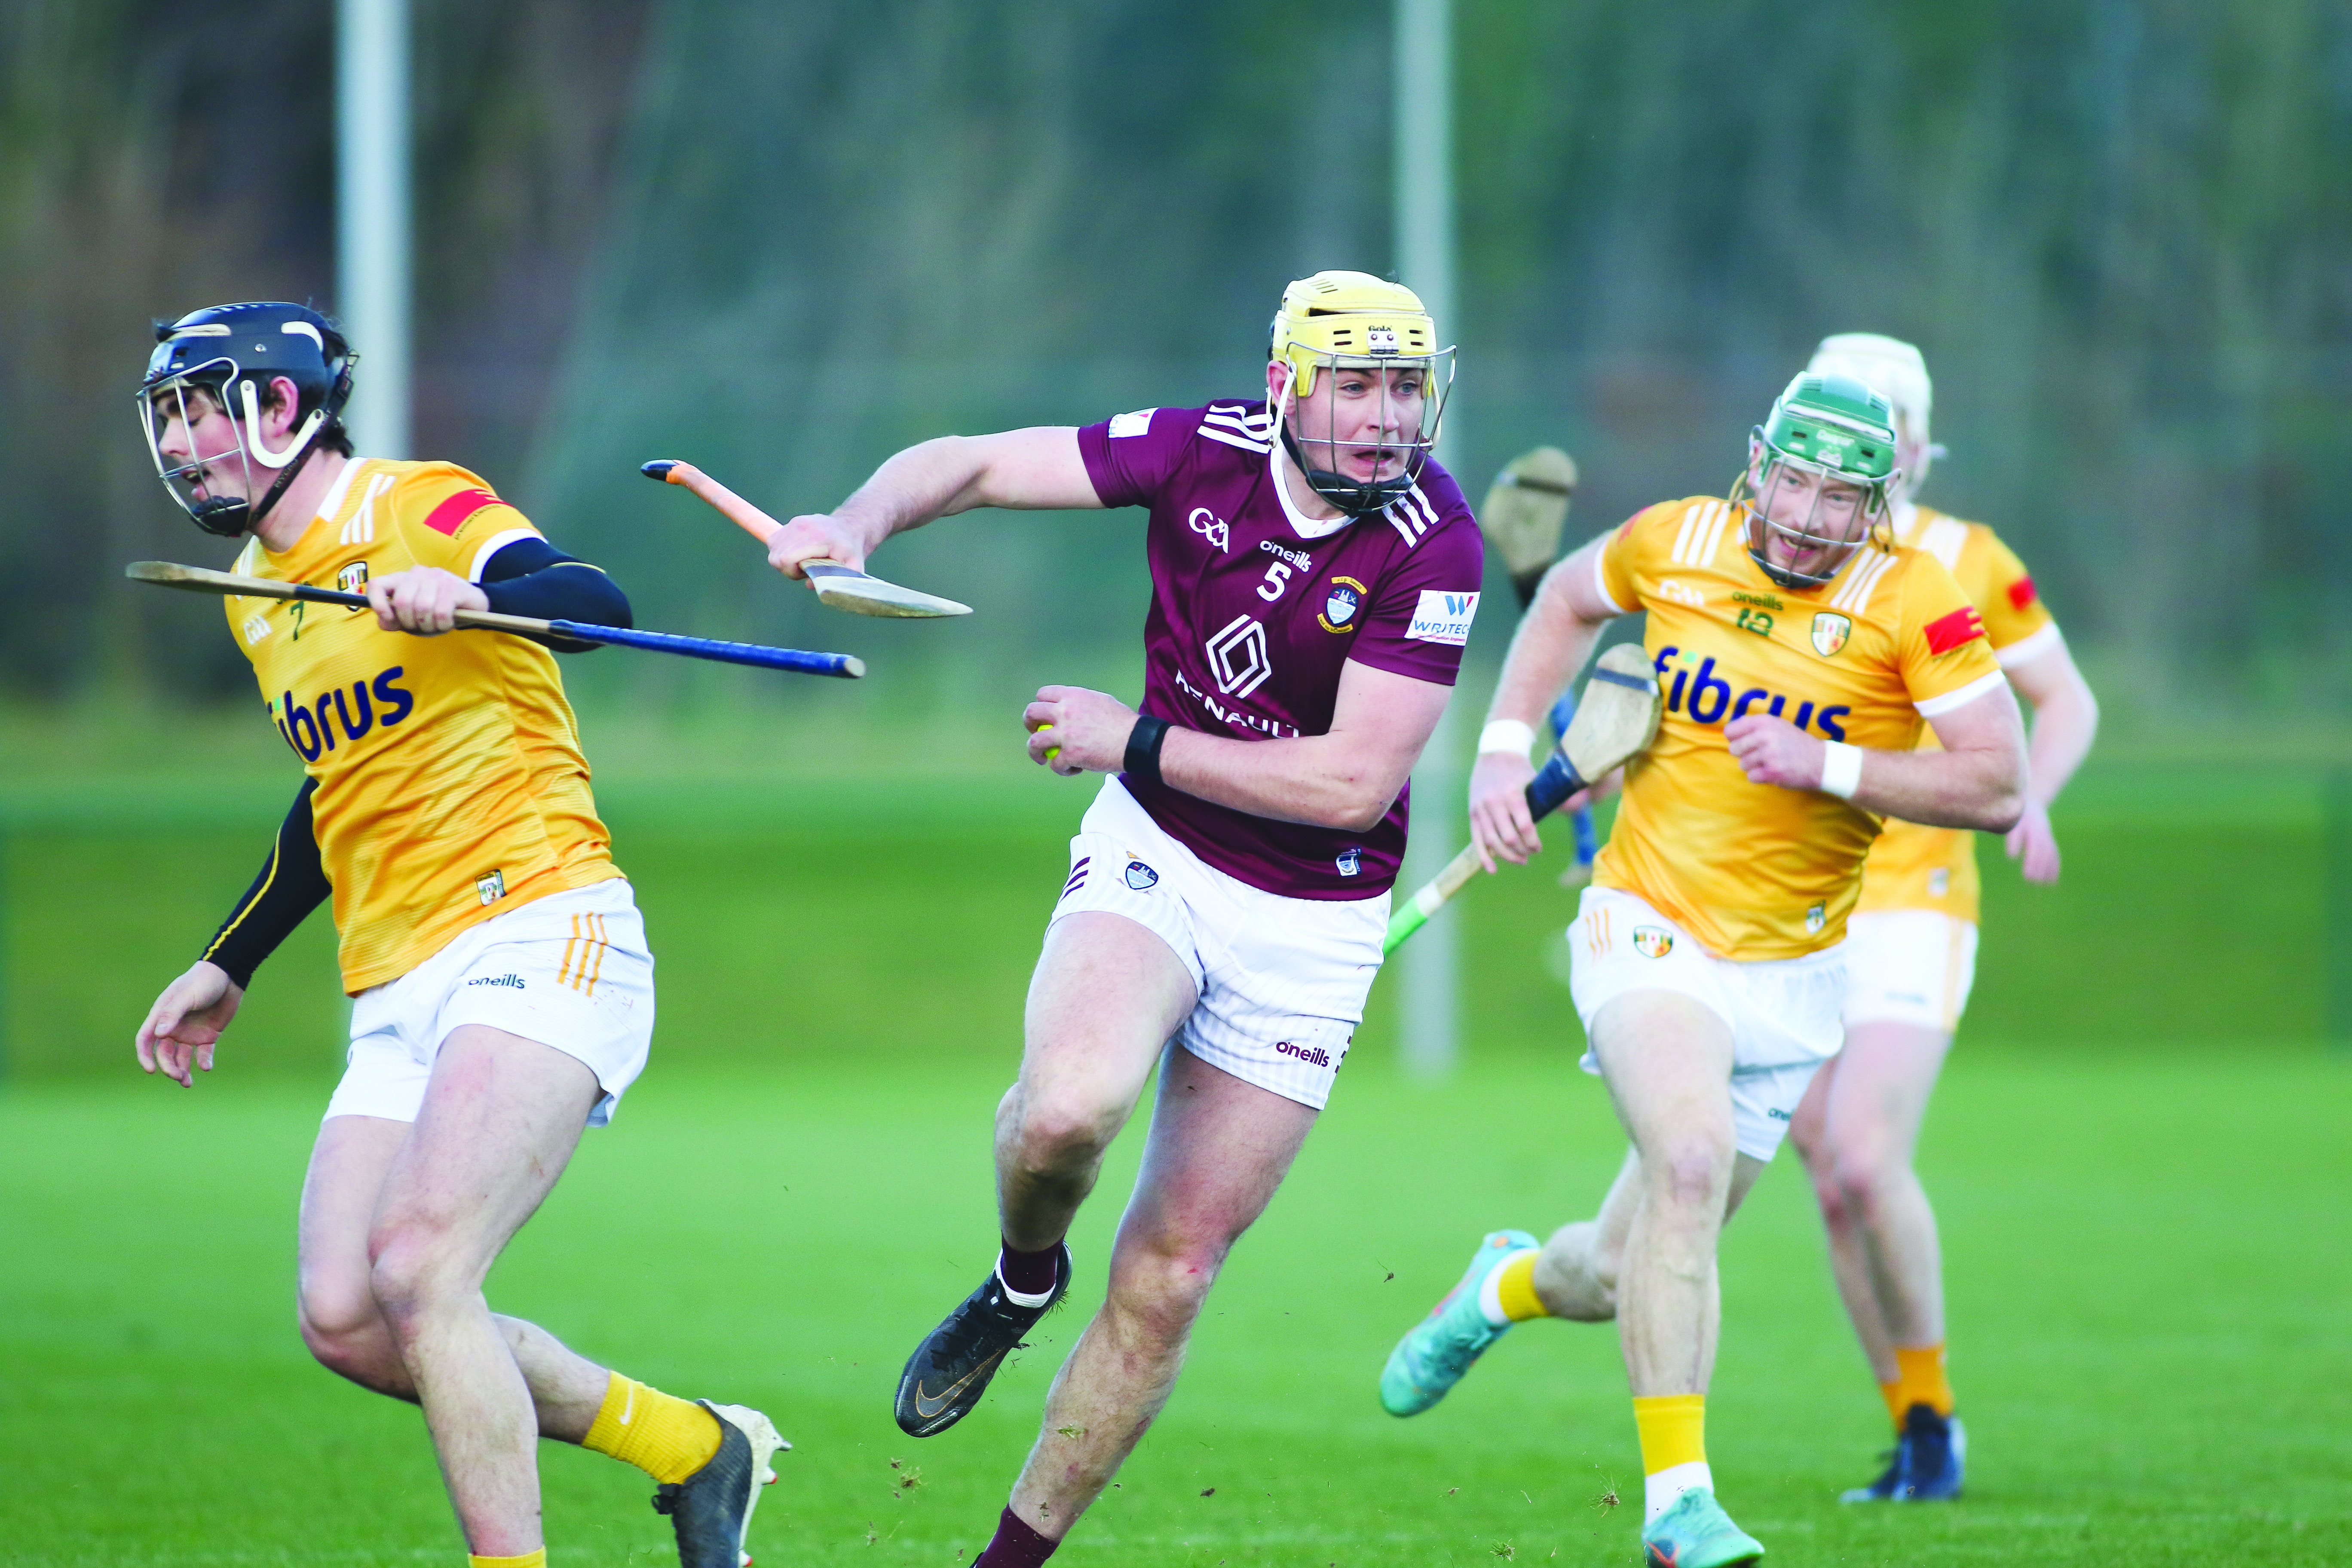 Darren Gleeson was disappointed with how his Antrim side performed in Saturday’s defeat against Westmeath